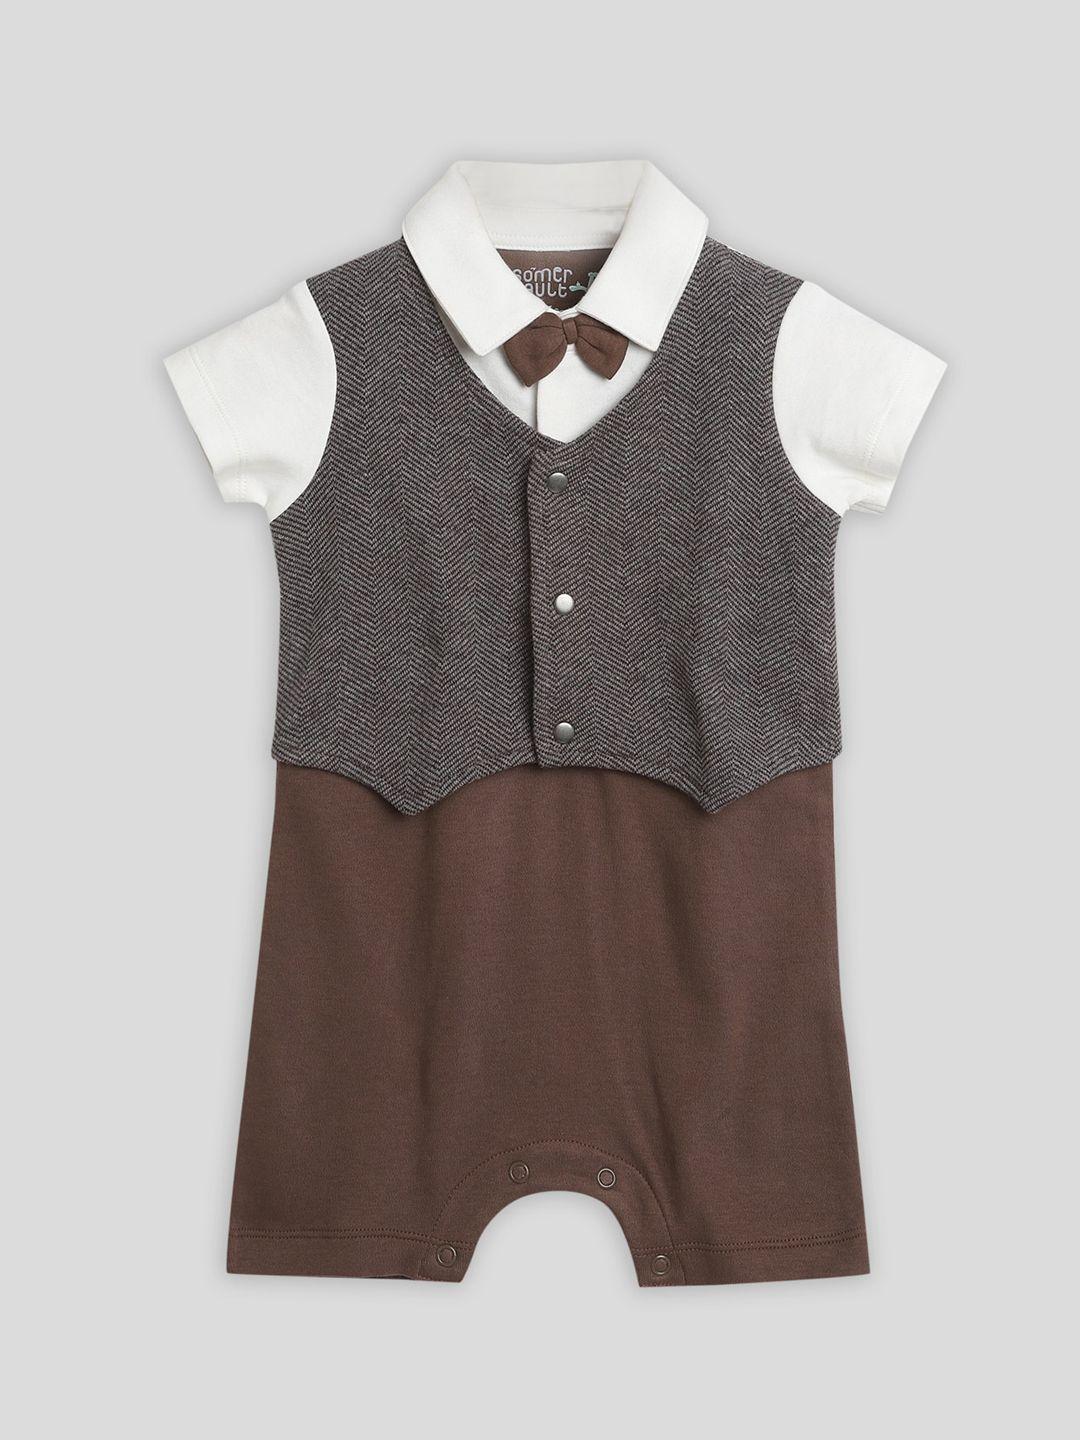 Somersault Infants Boys Cotton Romper With Bow